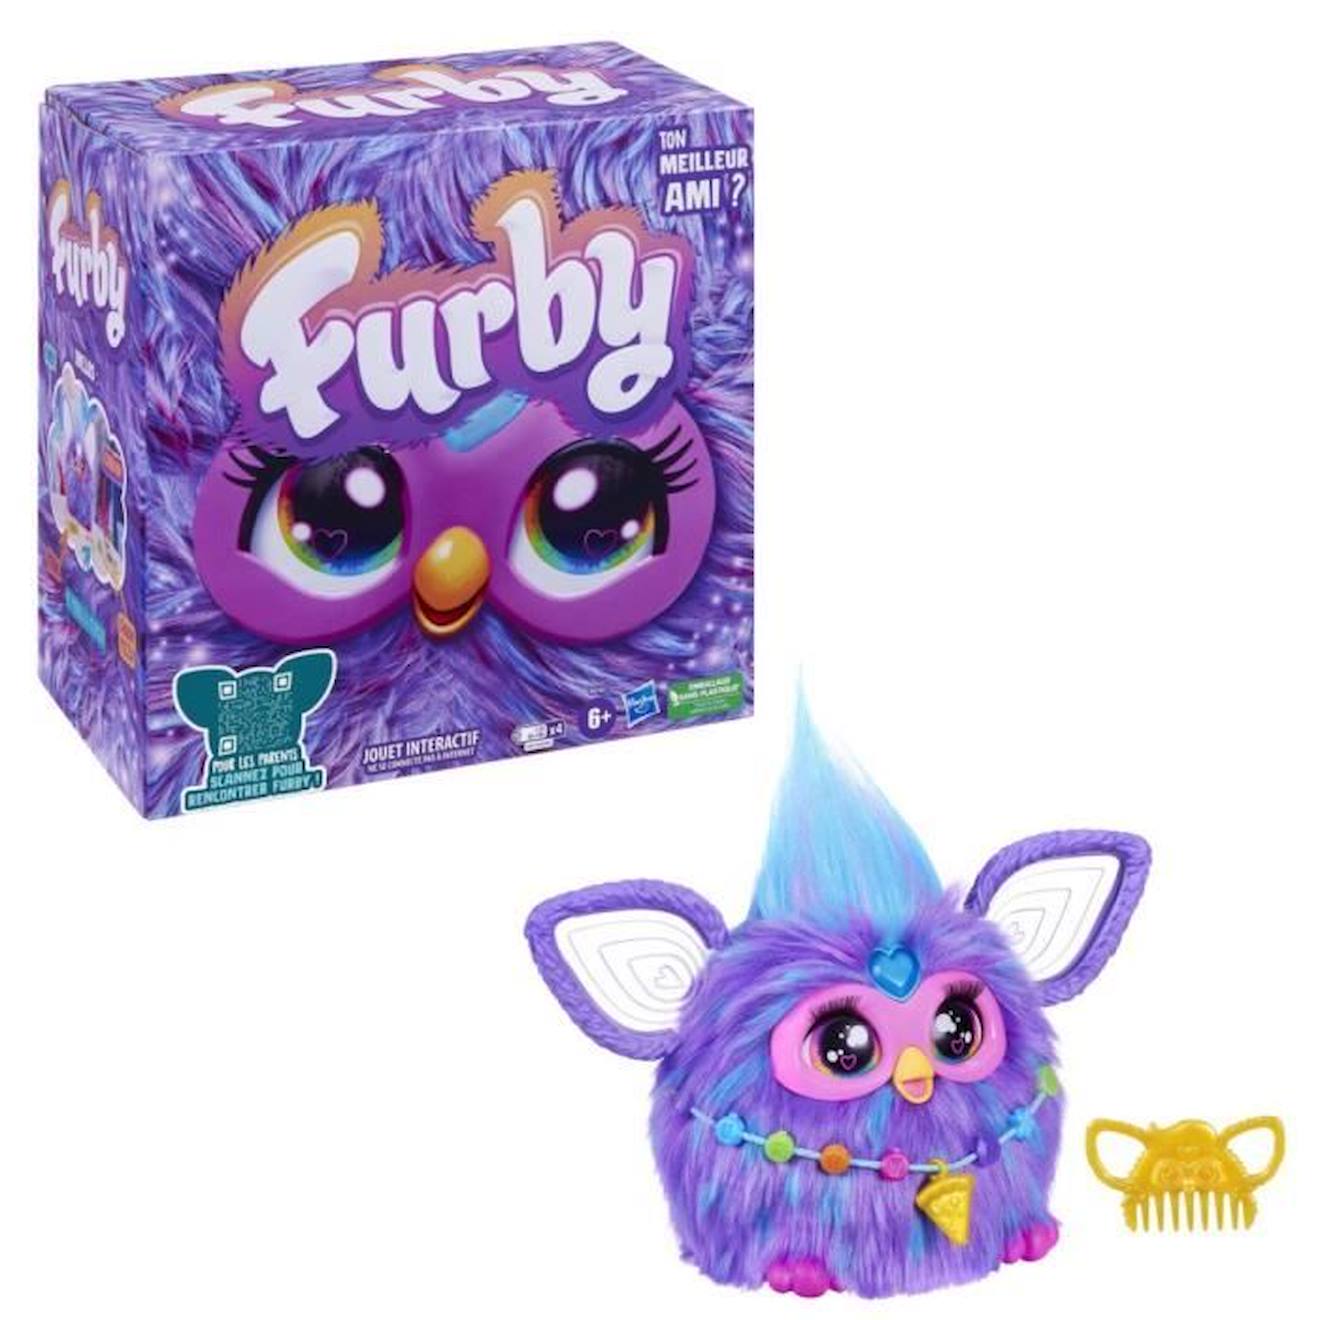 Furby Boom multicolore Sonore Yeux Lumineux Peluche Interactive Parlant fr  Hasbro